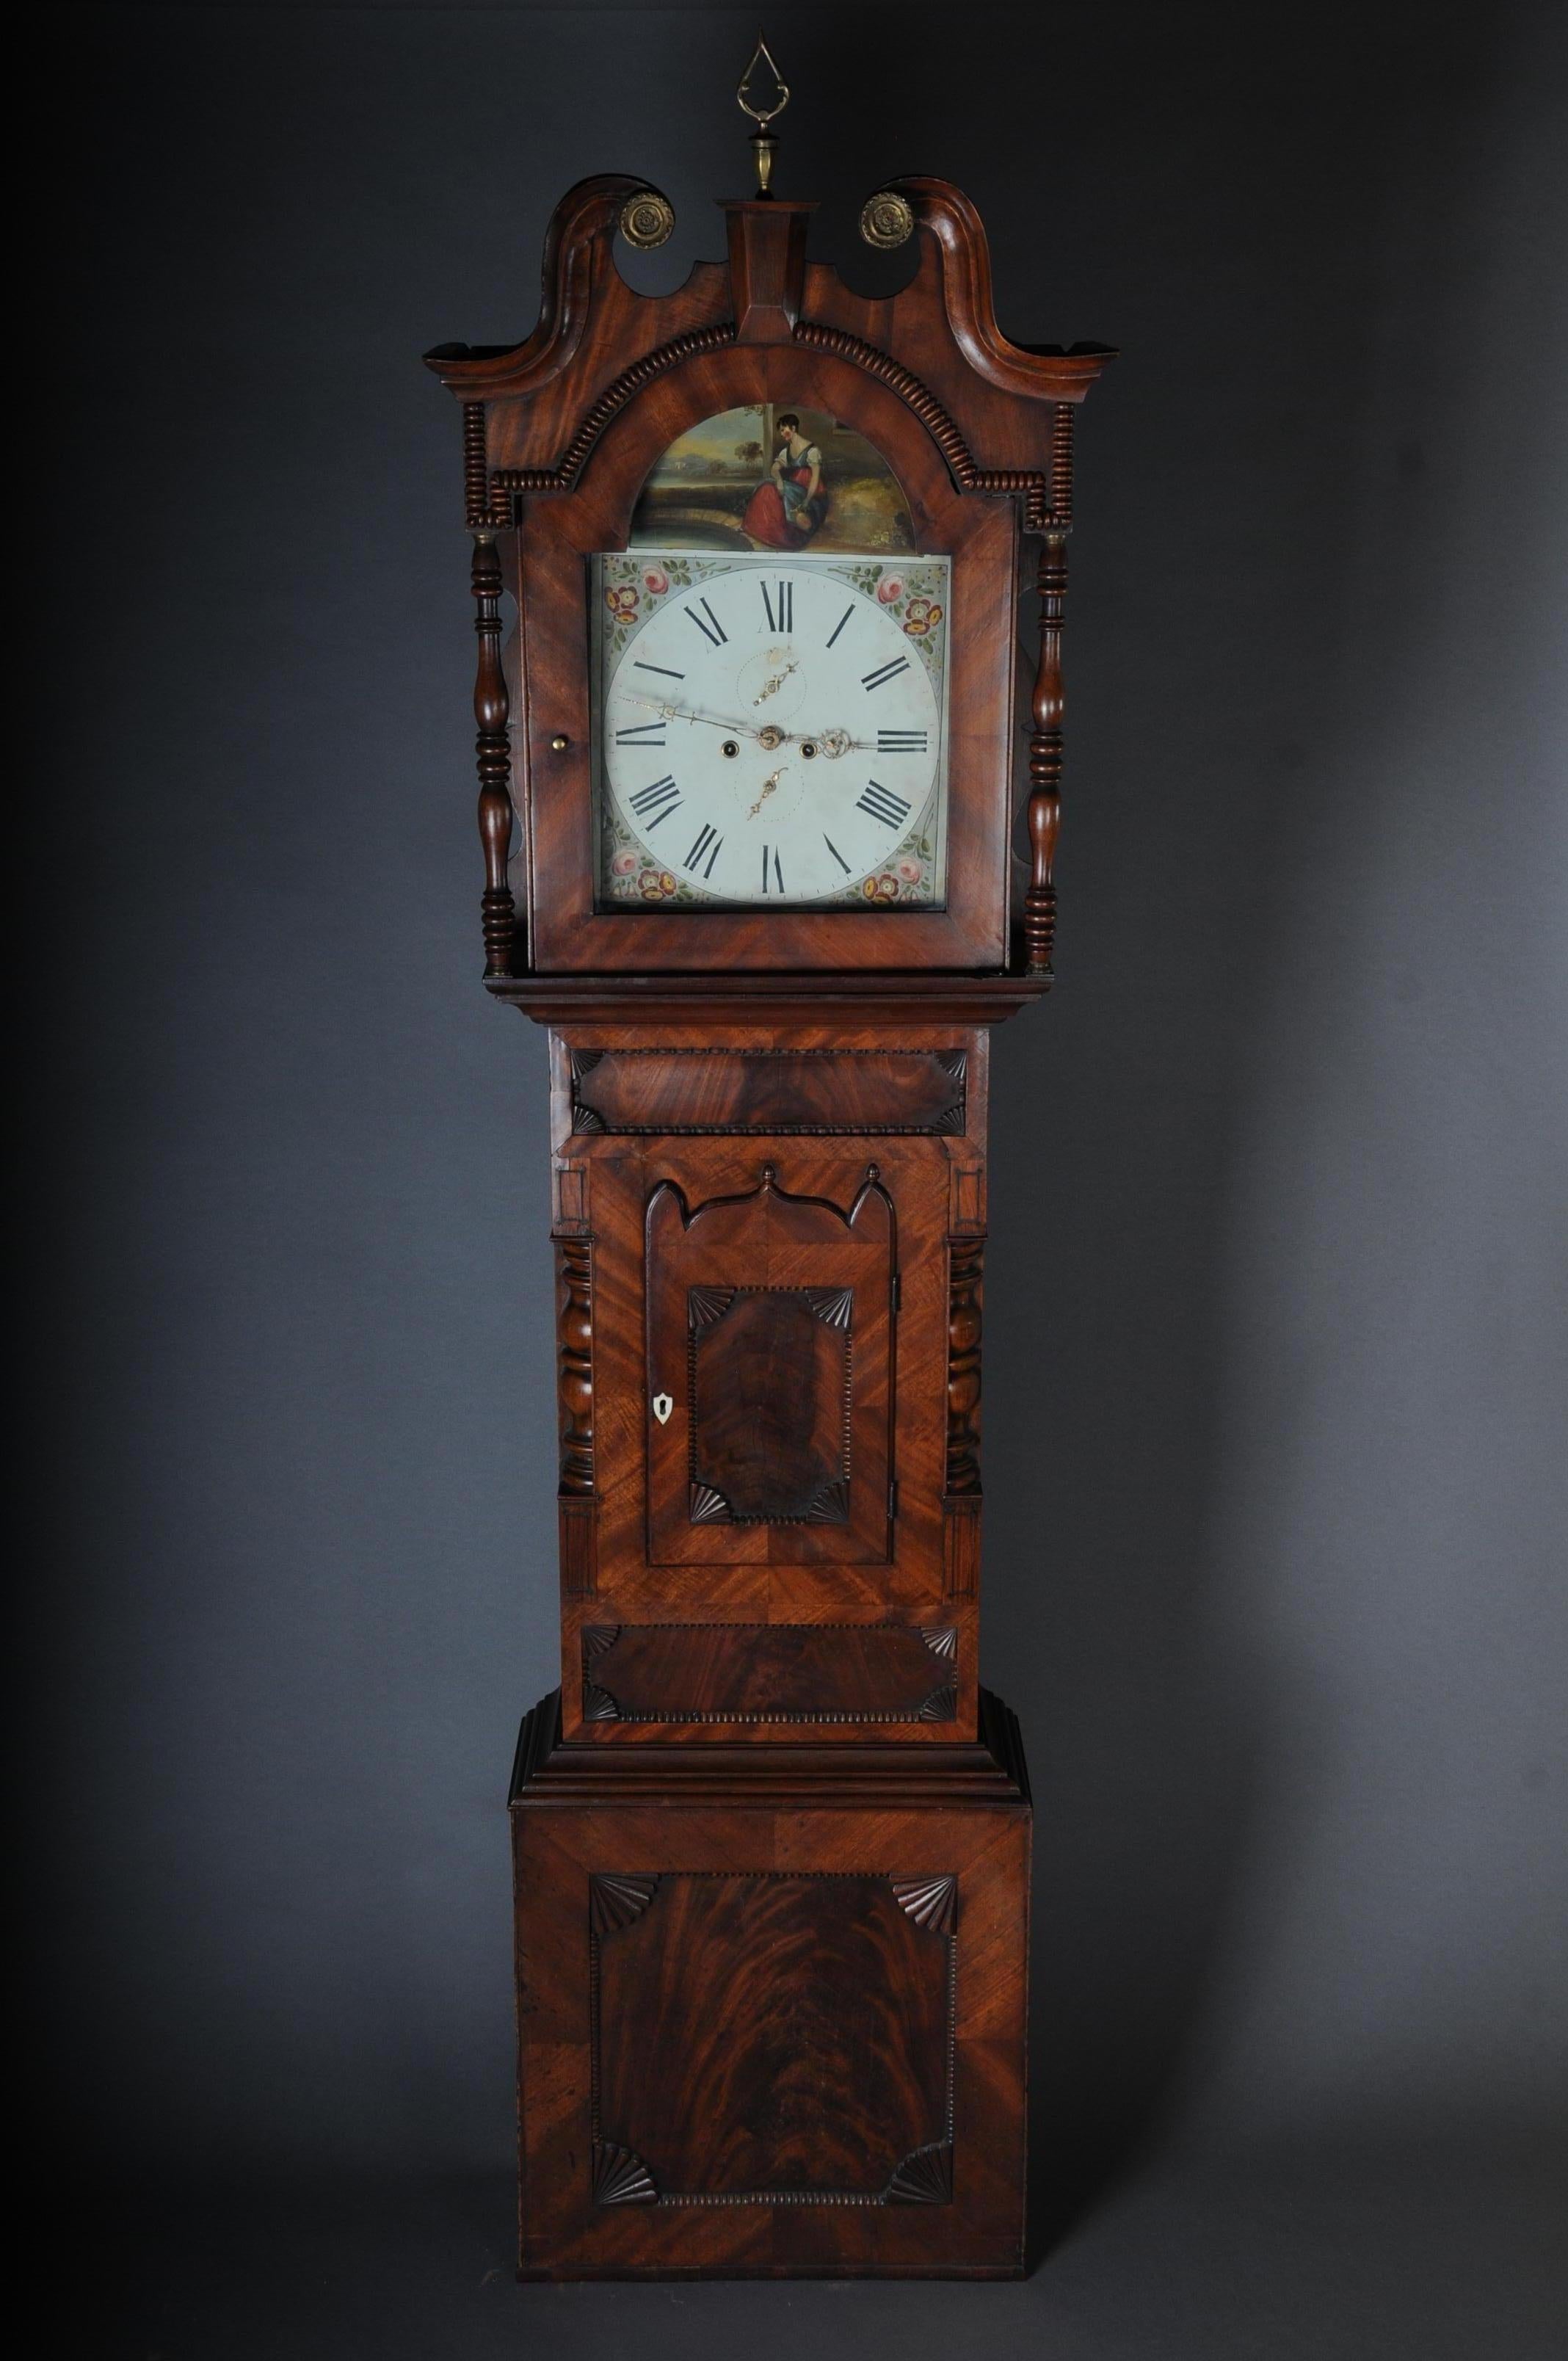 Unique antique English grandfather clock, mahogany, 18th century.

English floor clock, 18th century, mahogany veneer with root wood mirror, bead bar strips, turned columns, white dial with Roman numerals and gold-plated hands, polychrome flower